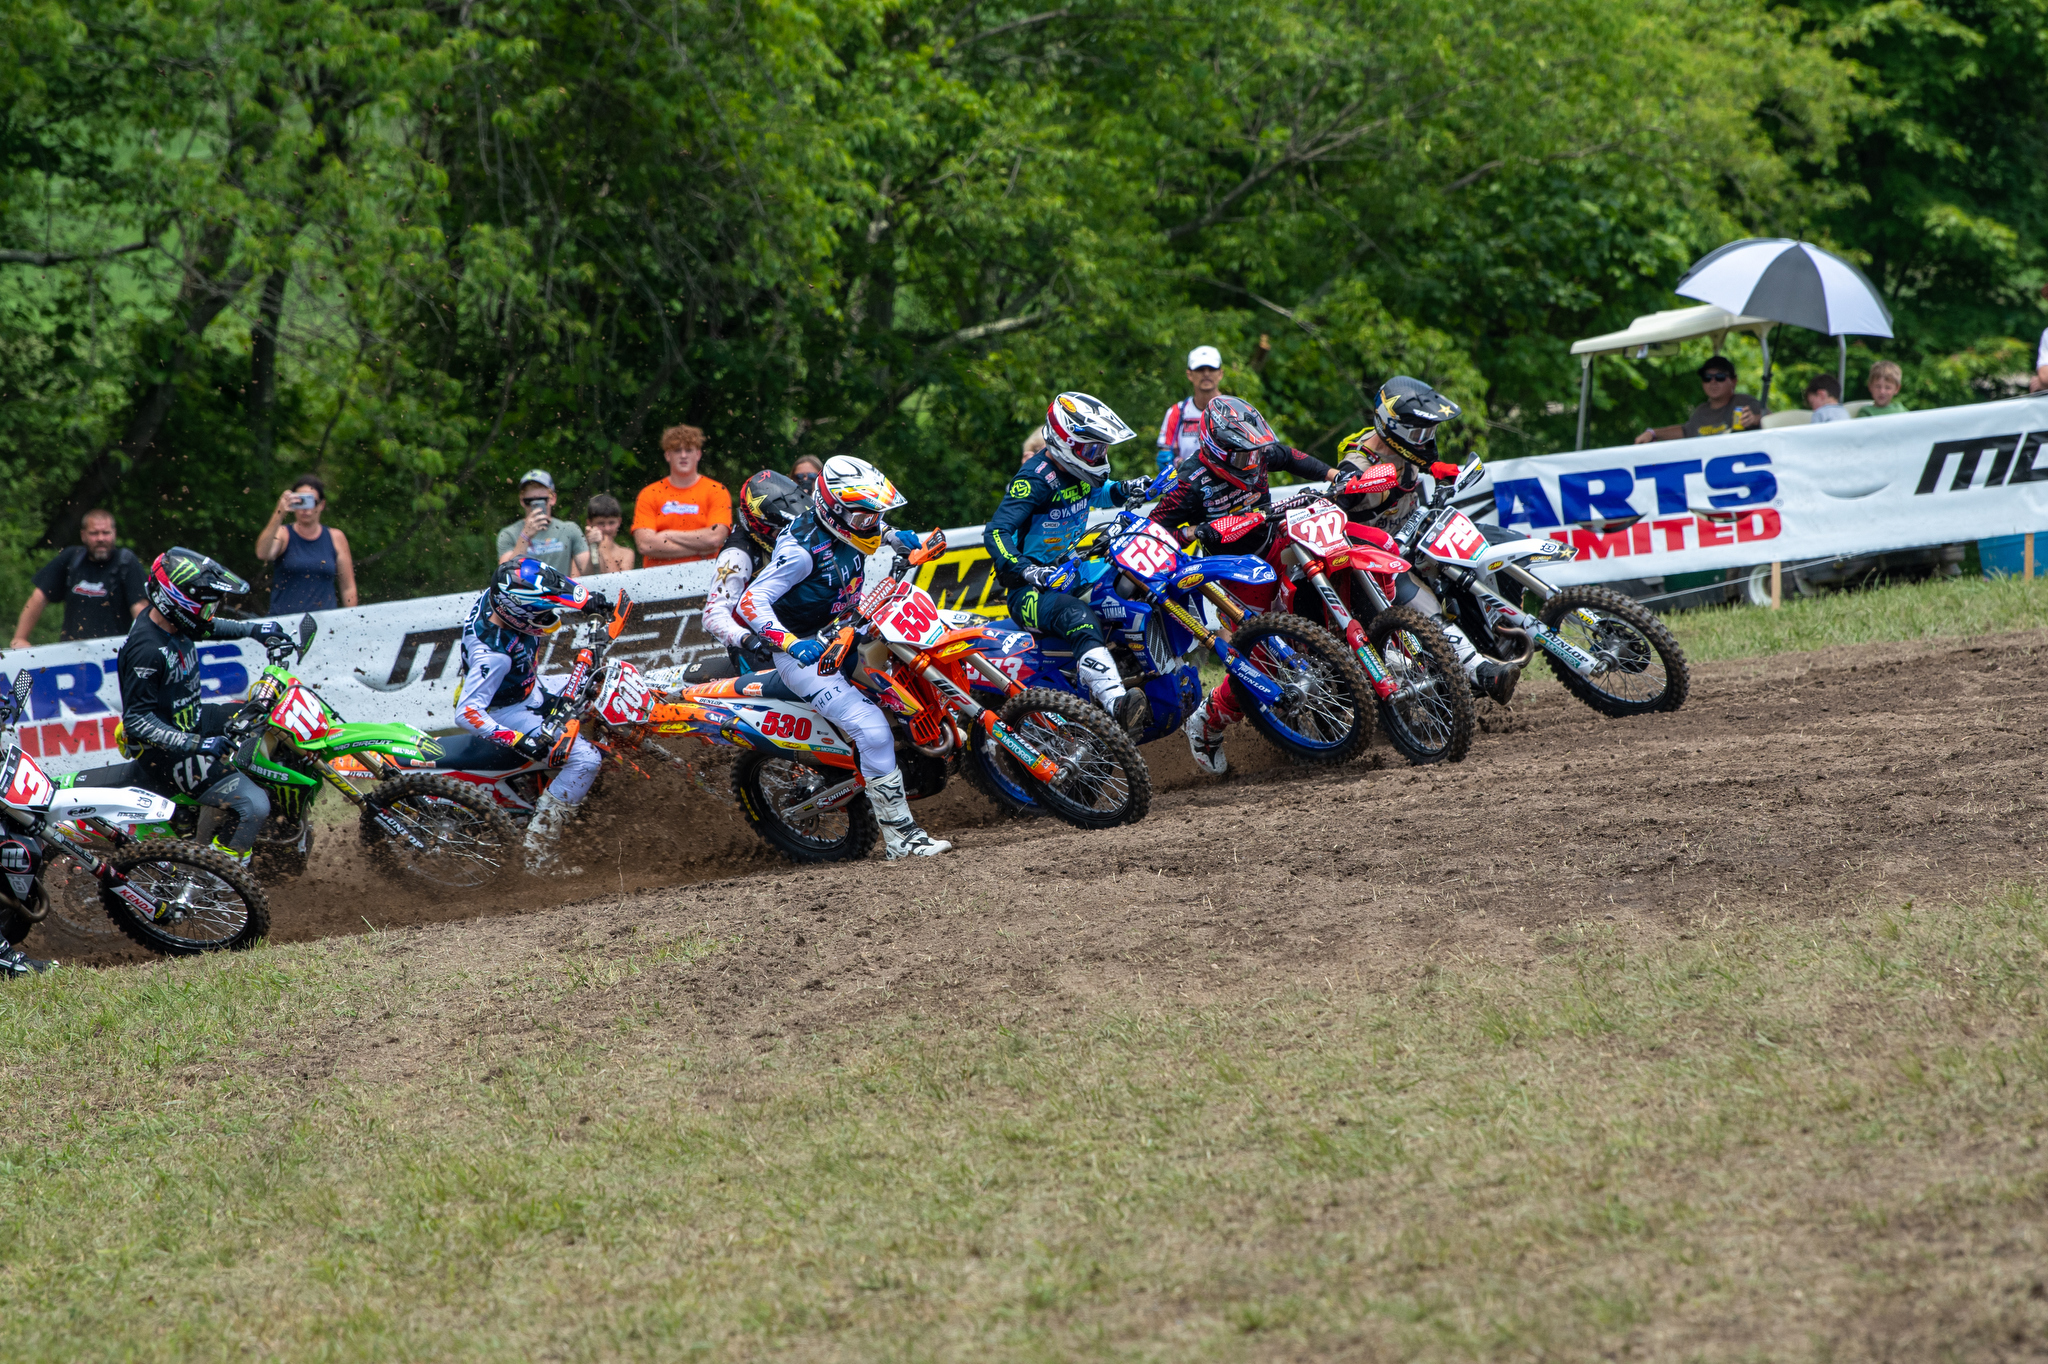 GNCC Racing will take place across the road from High Point Raceway on June 4 and 5